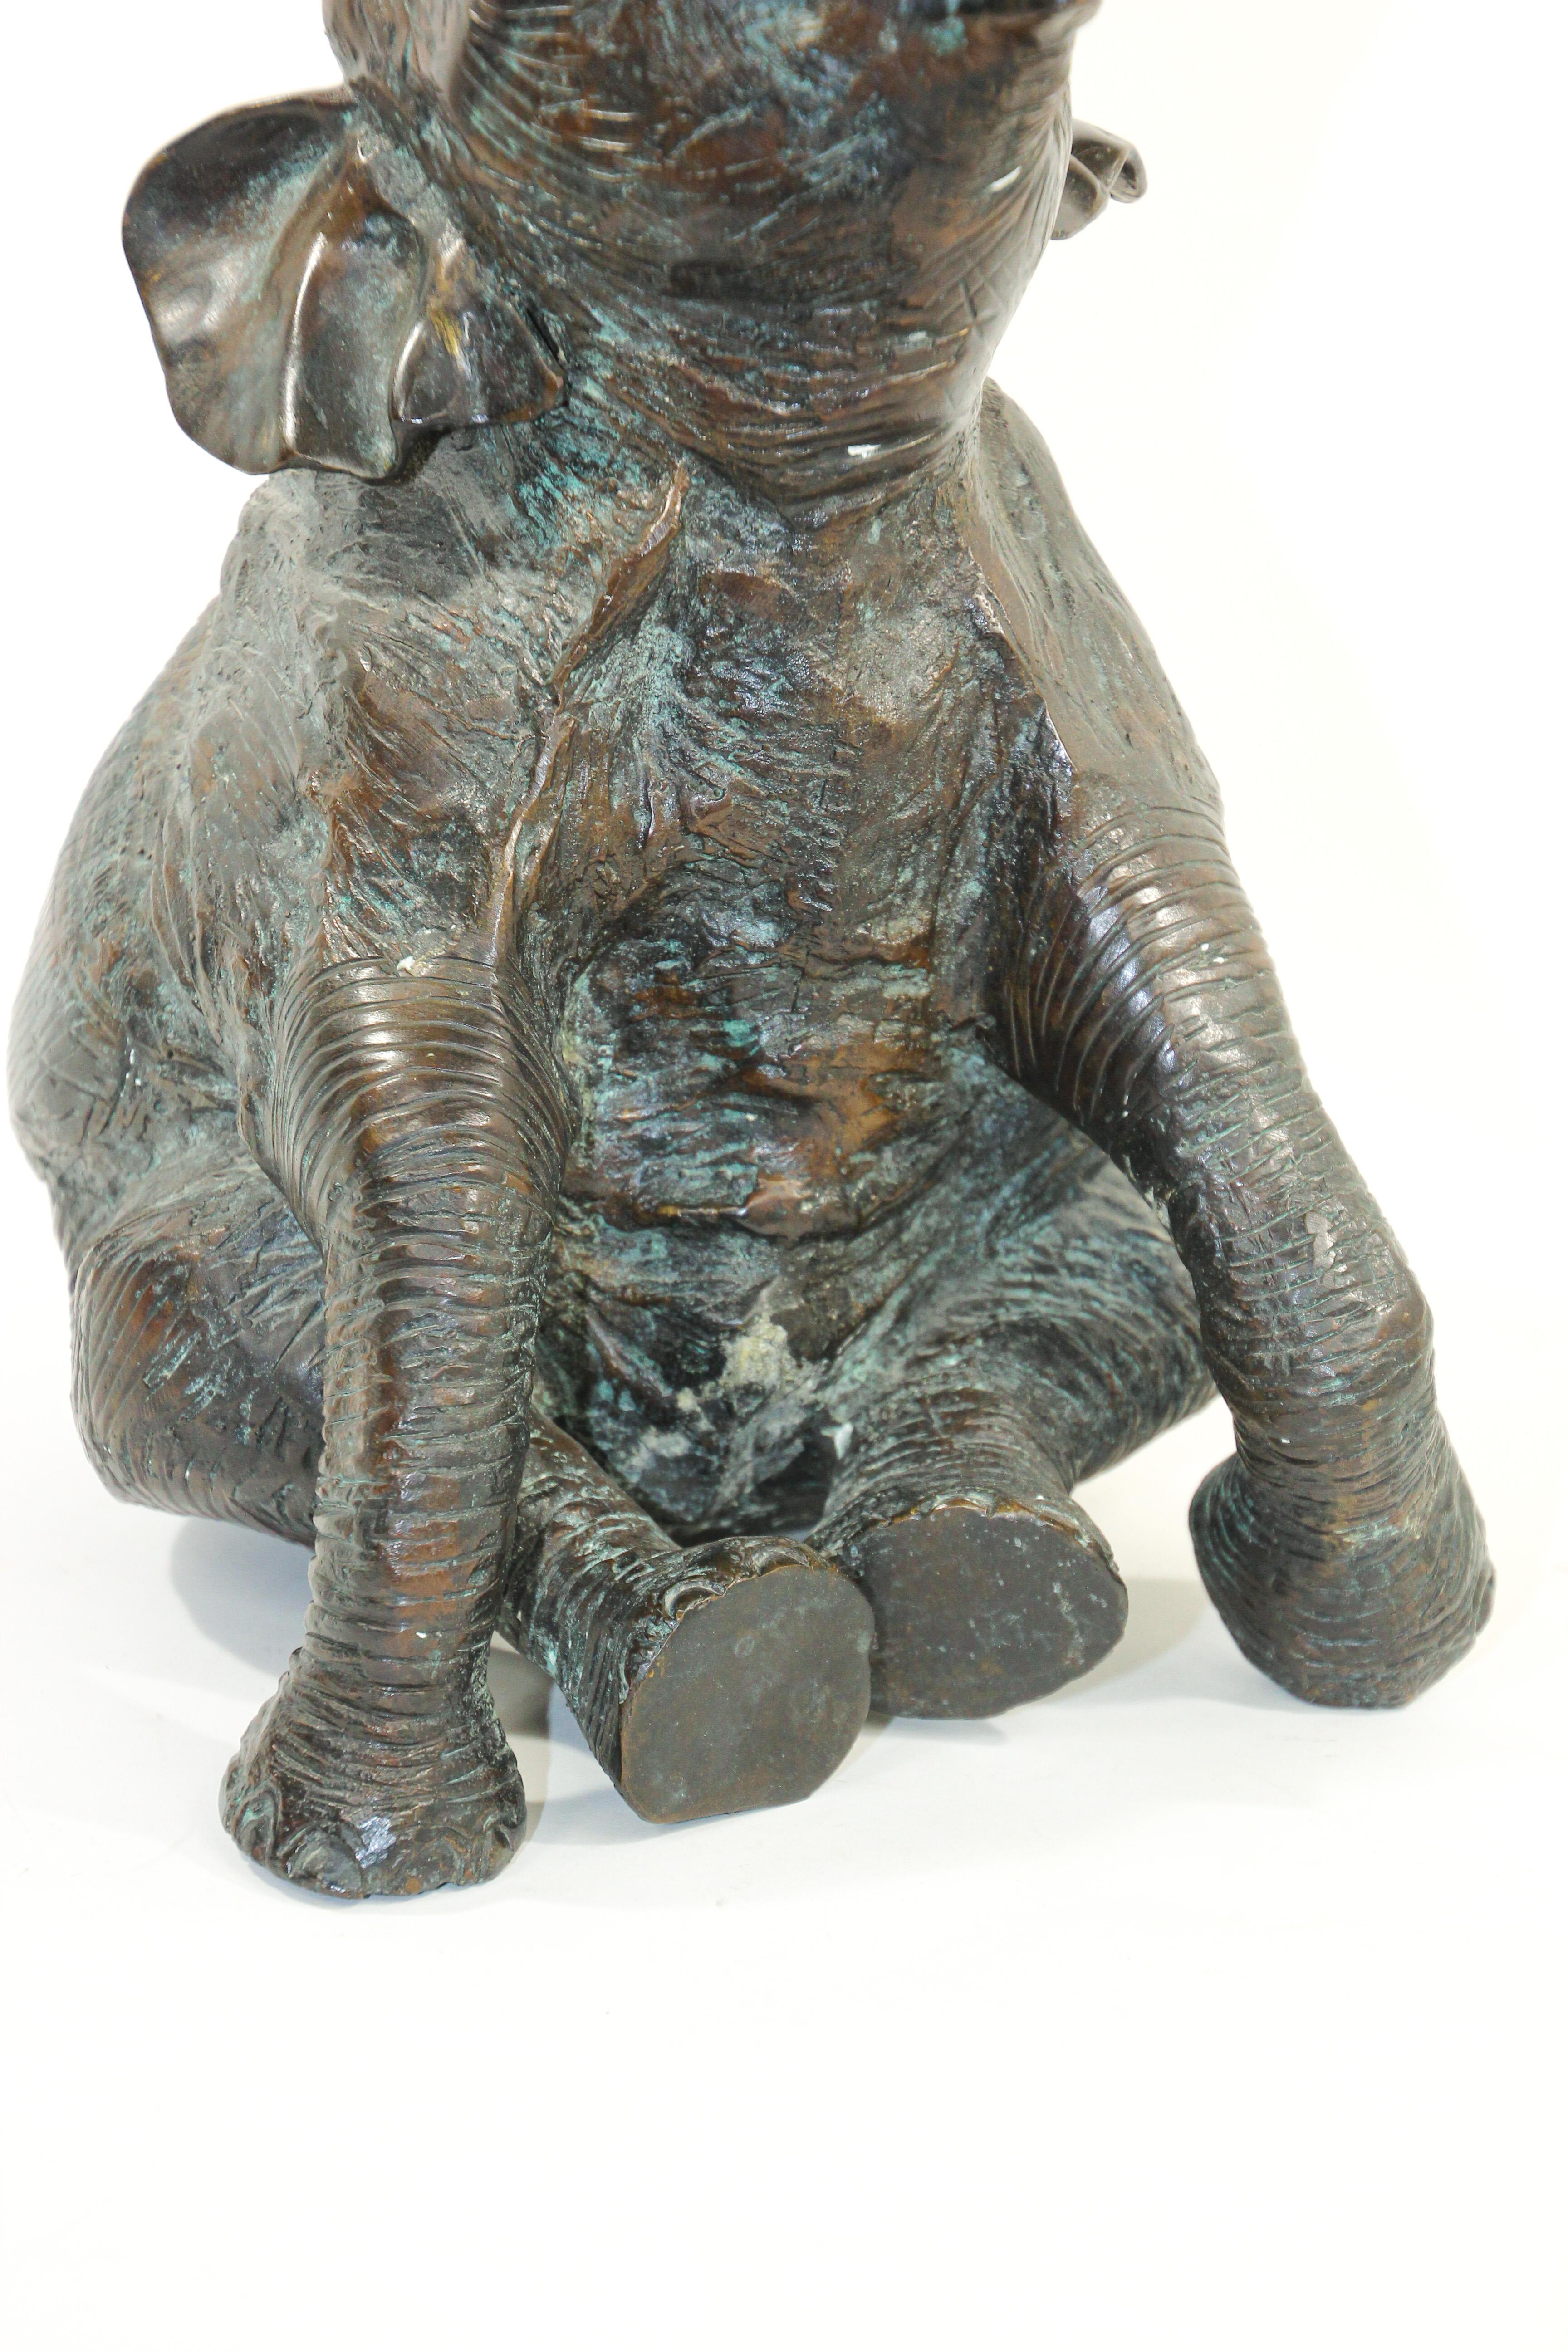 Large Asian Bronze Elephant with Trunk Up 2